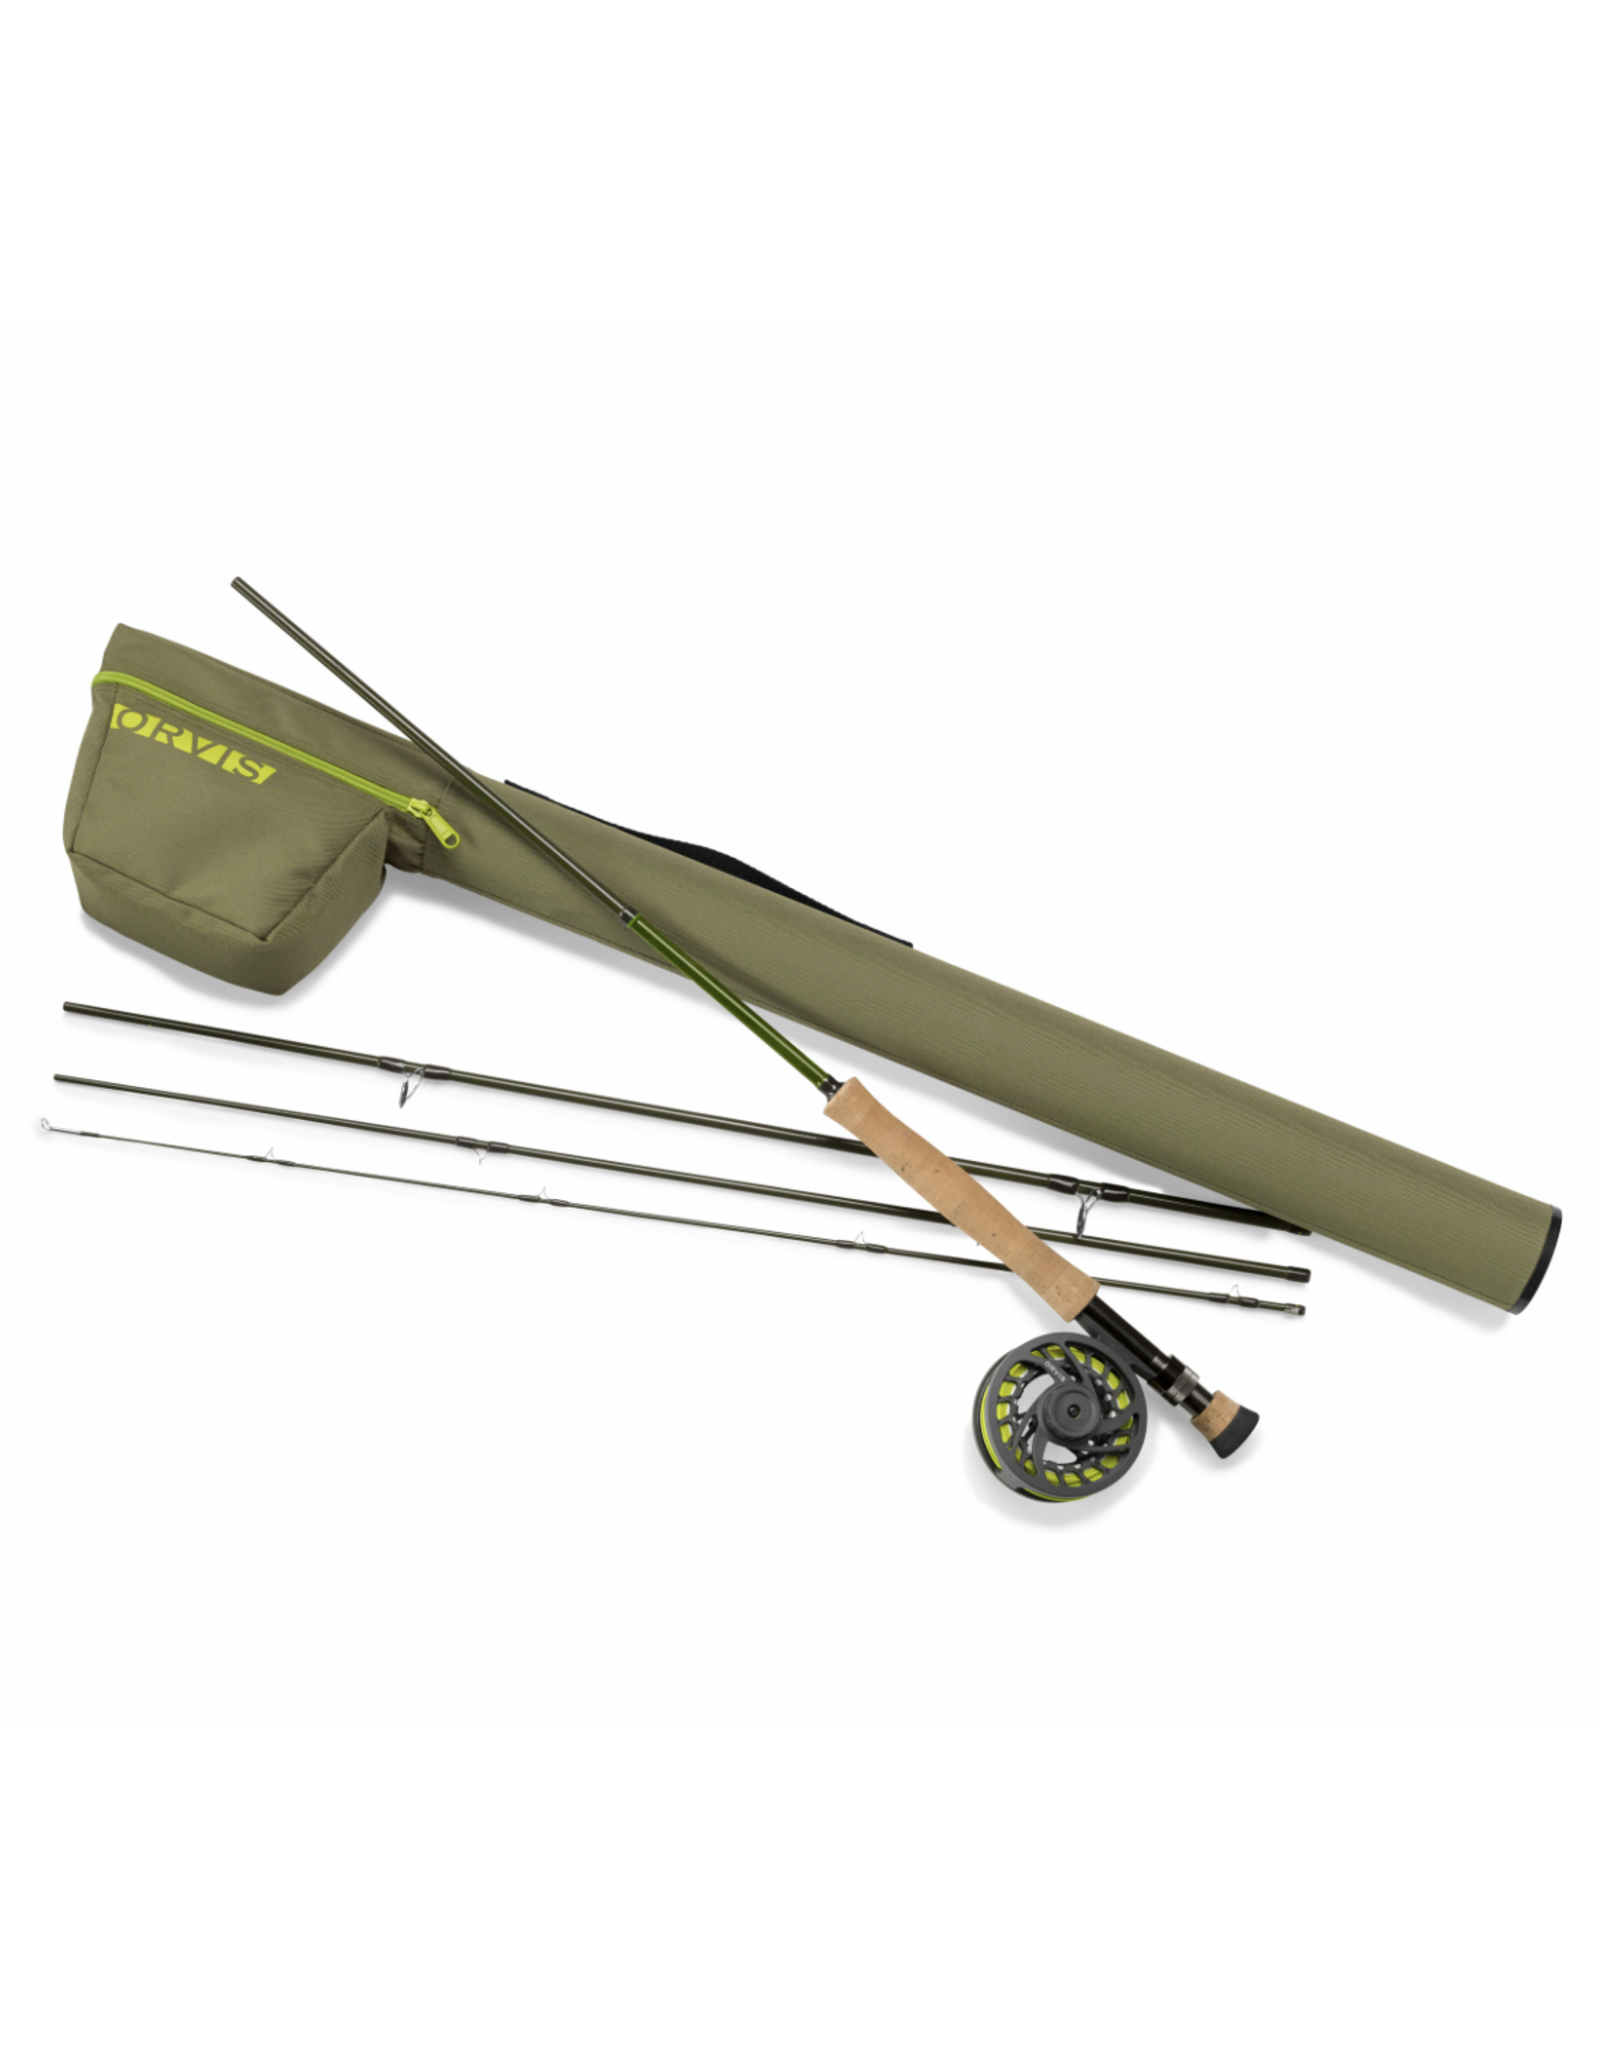 NEW Orvis Encounter Outfit 9 ft 6wt